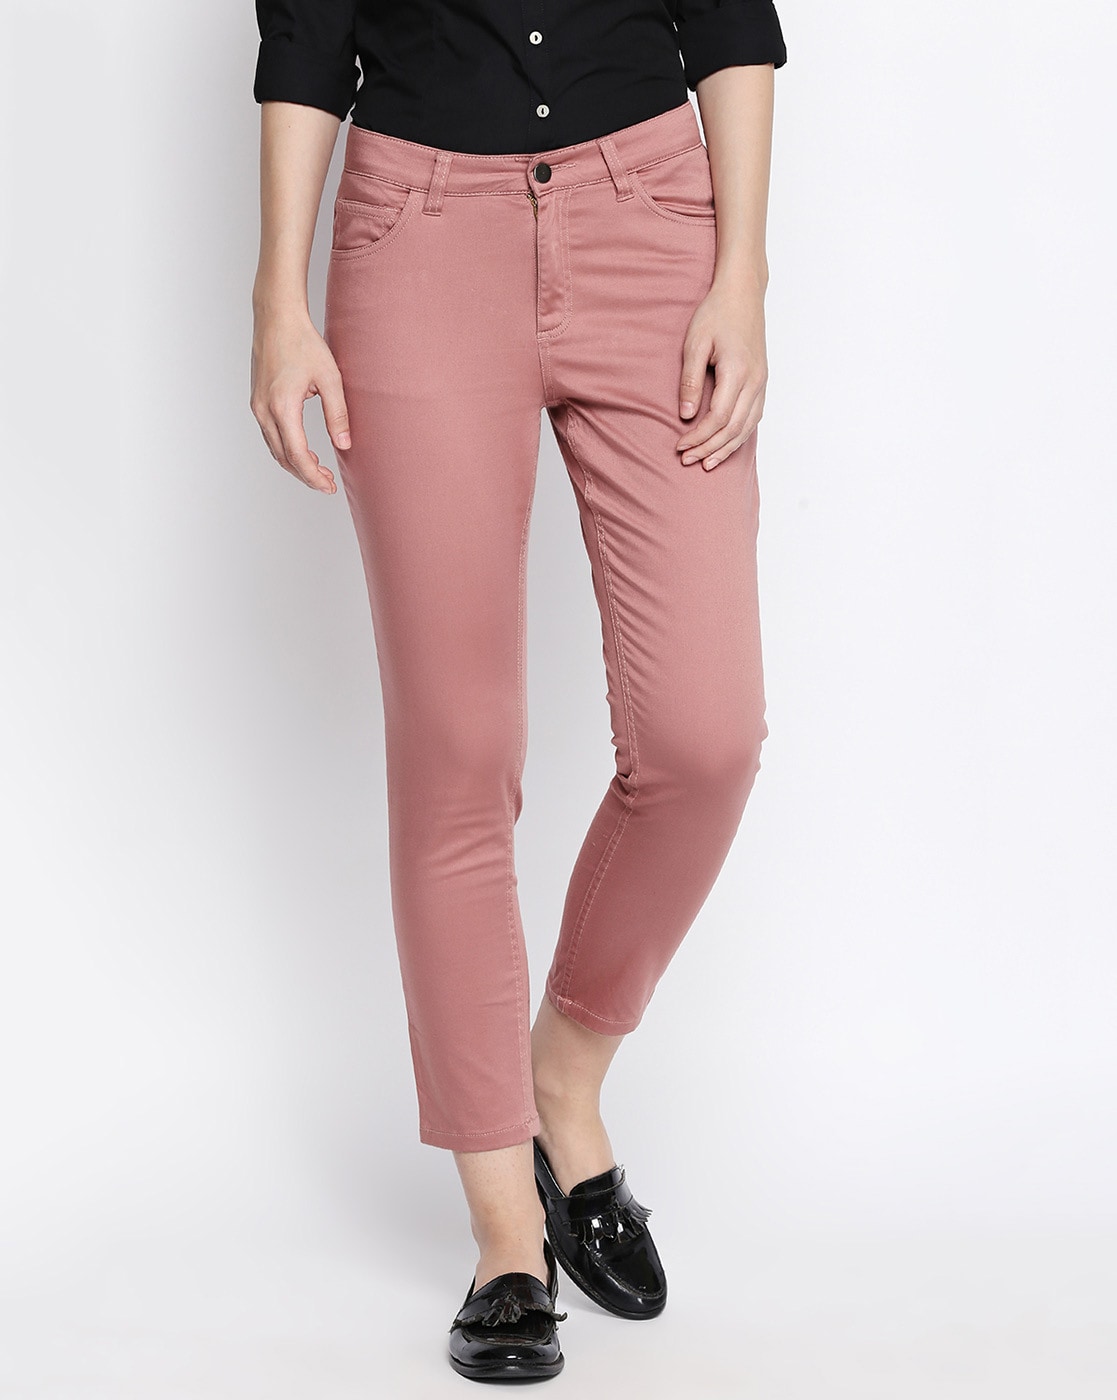 Buy Pink Trousers  Pants for Women by Annabelle by Pantaloons Online   Ajiocom